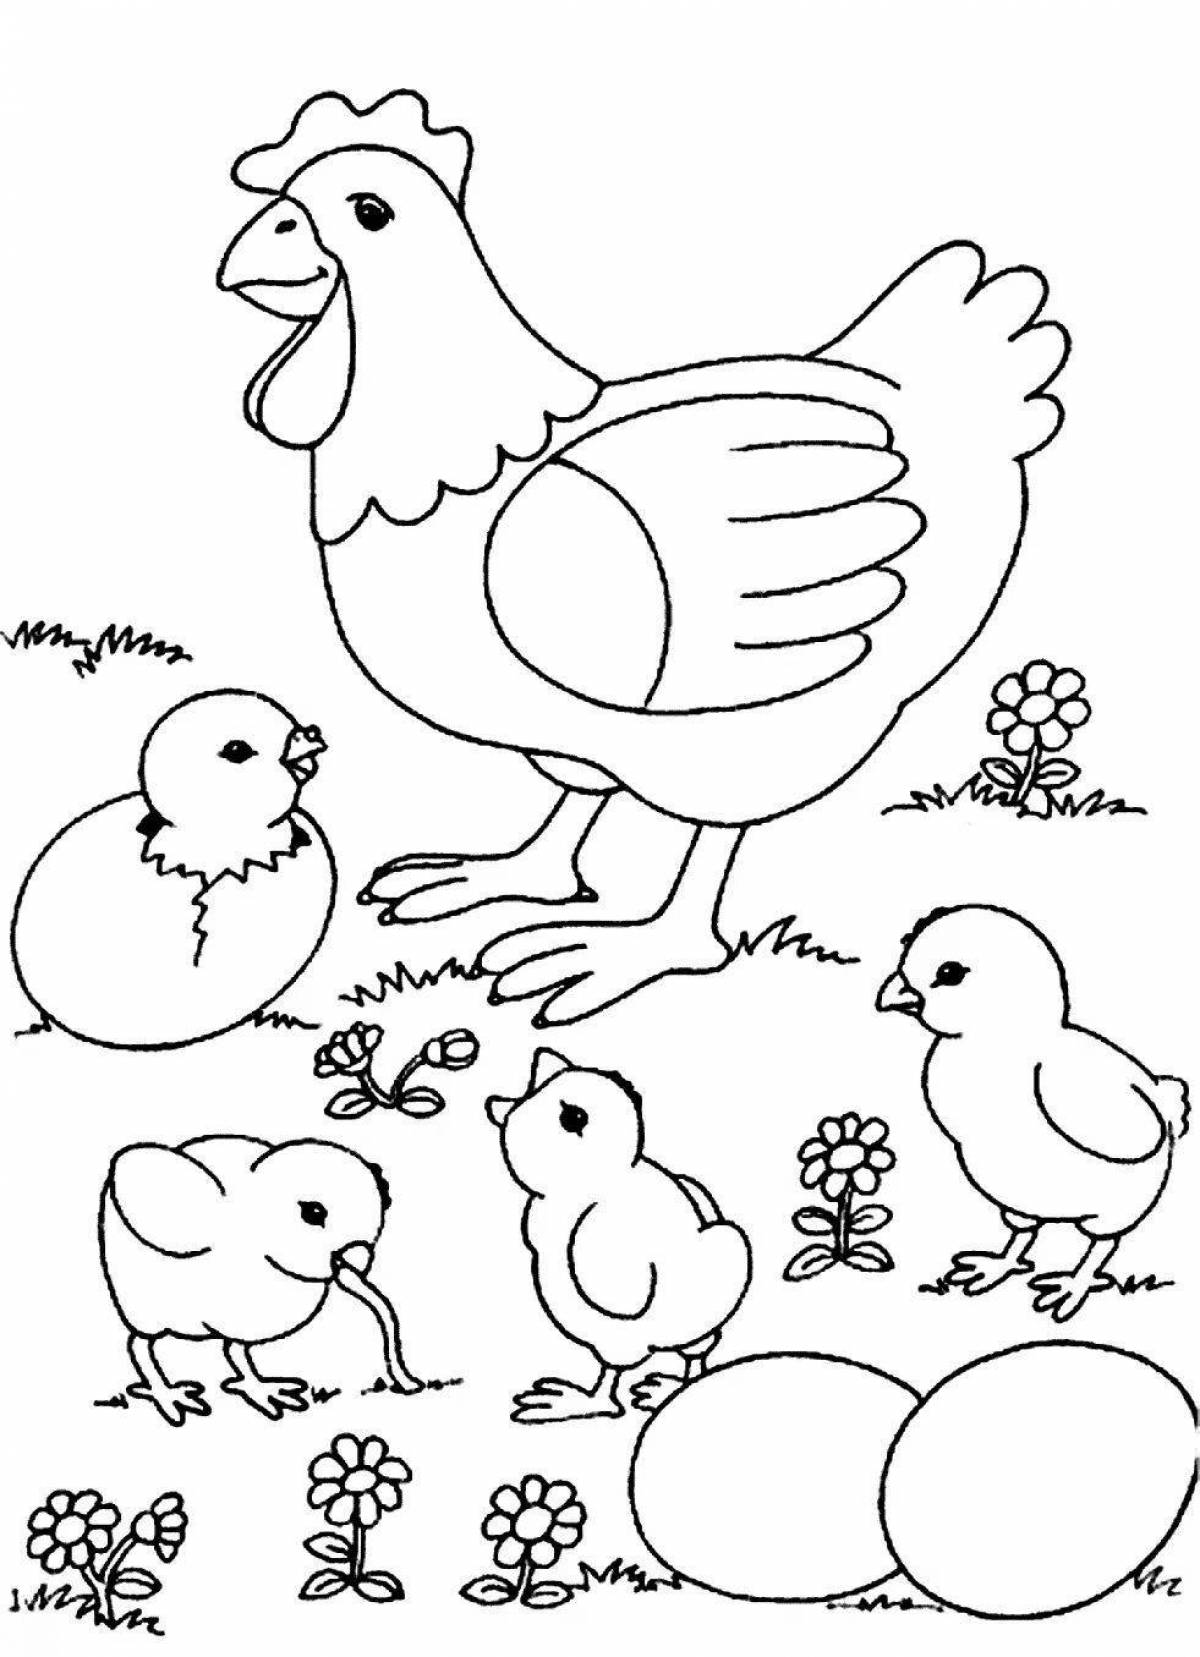 Adorable bird coloring book for kids 5-7 years old